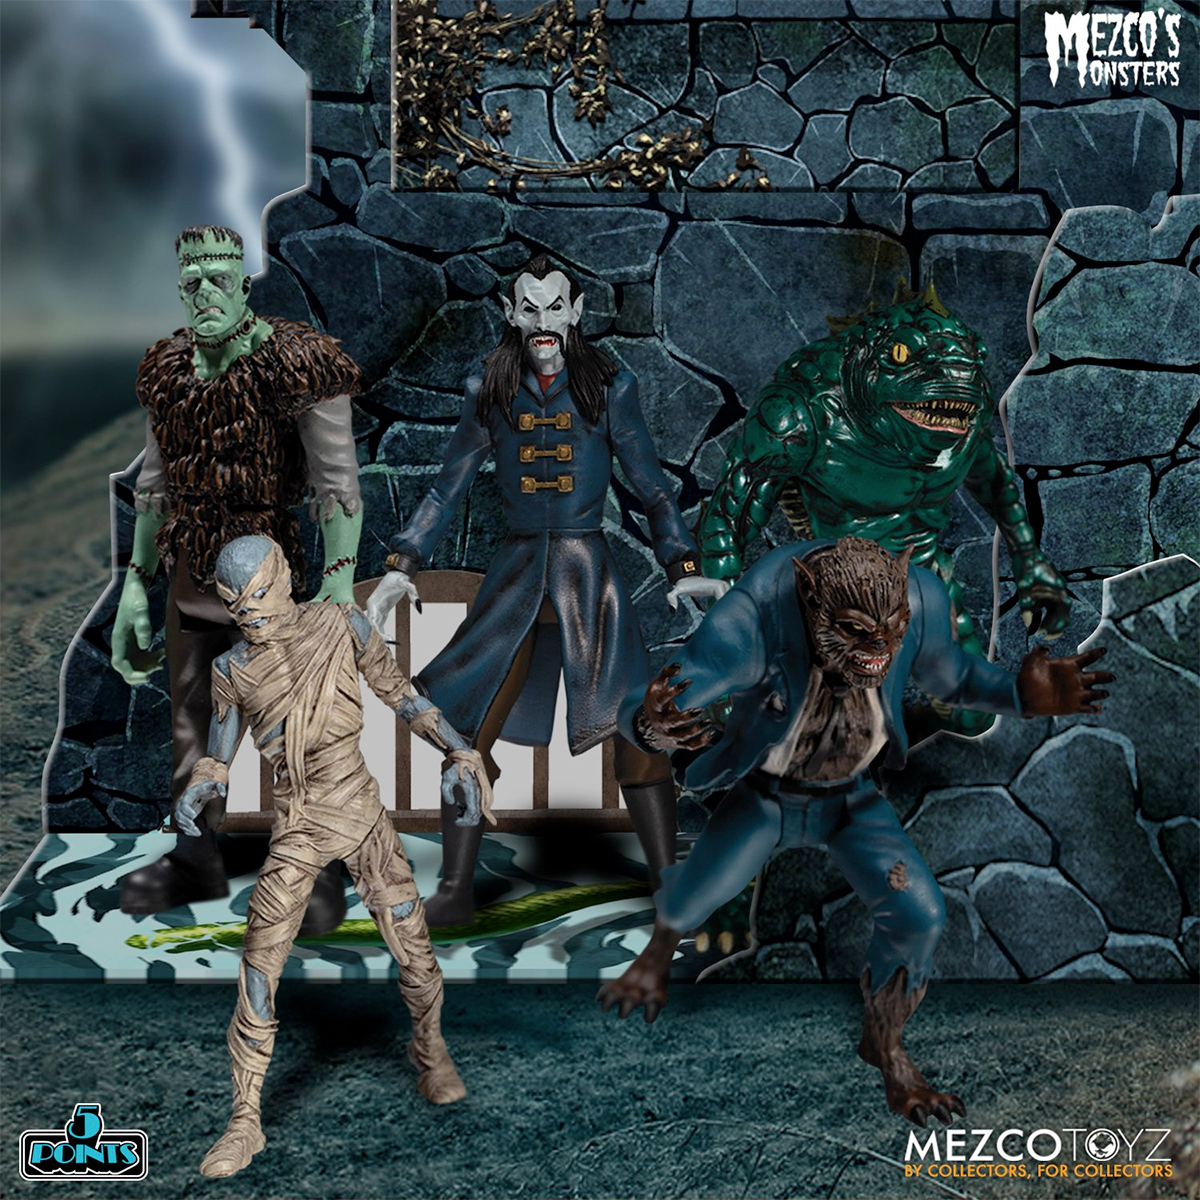 Mezco’s Monsters: Tower of Fear Deluxe Boxed Set